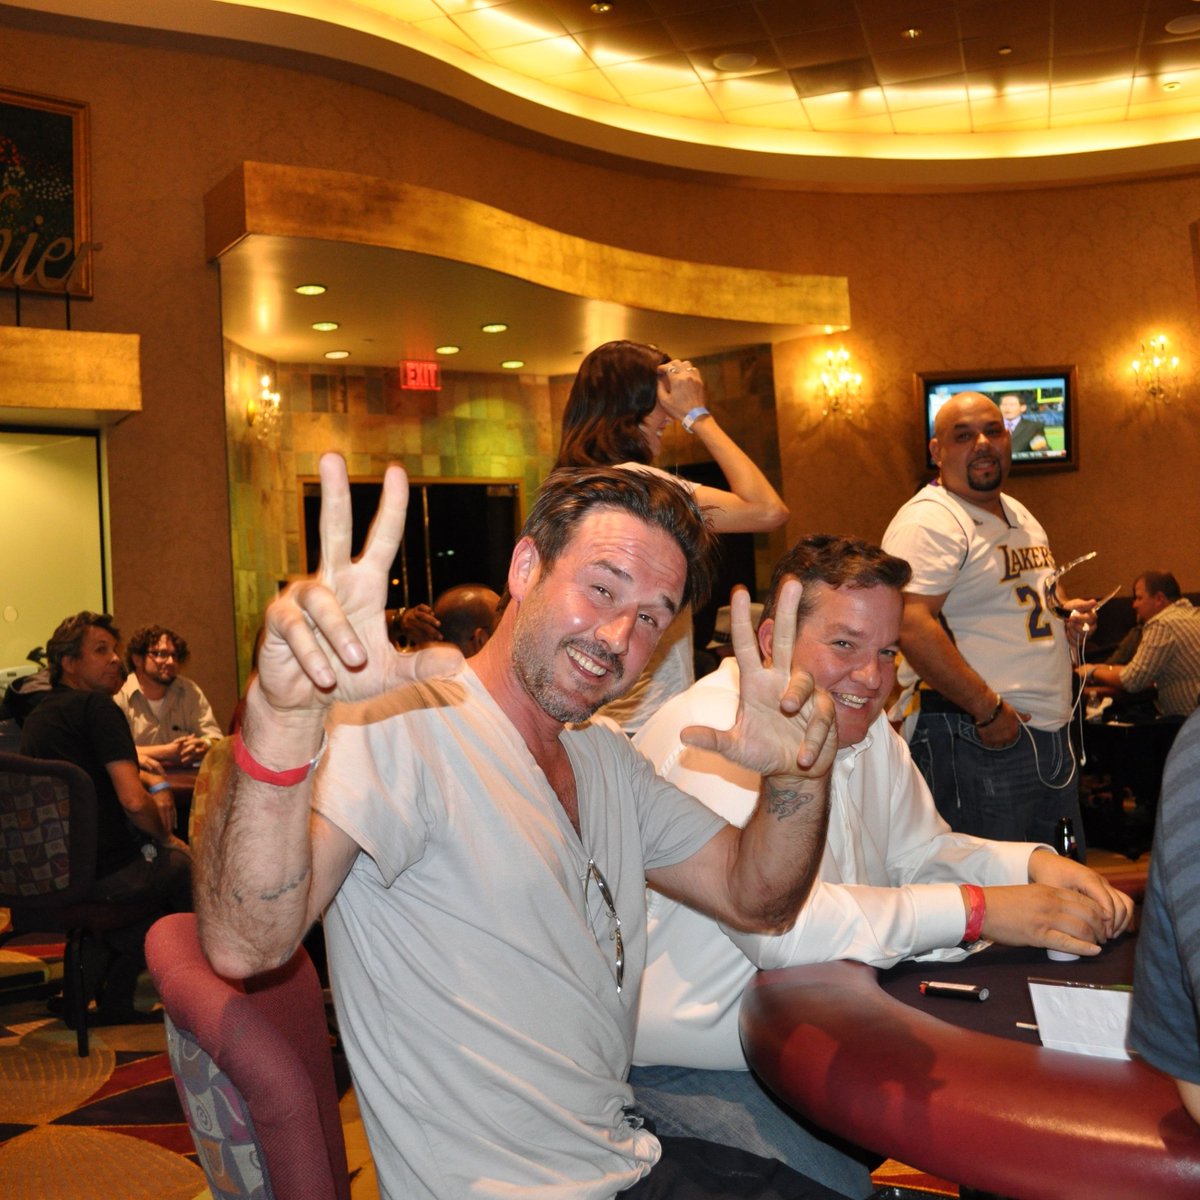 #ThrowbackThursday featuring #davidarquette & @WillieNelson at our Crystal Room for the All Star Texas Hold ‘Em Charity Tournament back in September of 2010. #HUSTLERCasino #WillieNelson #History